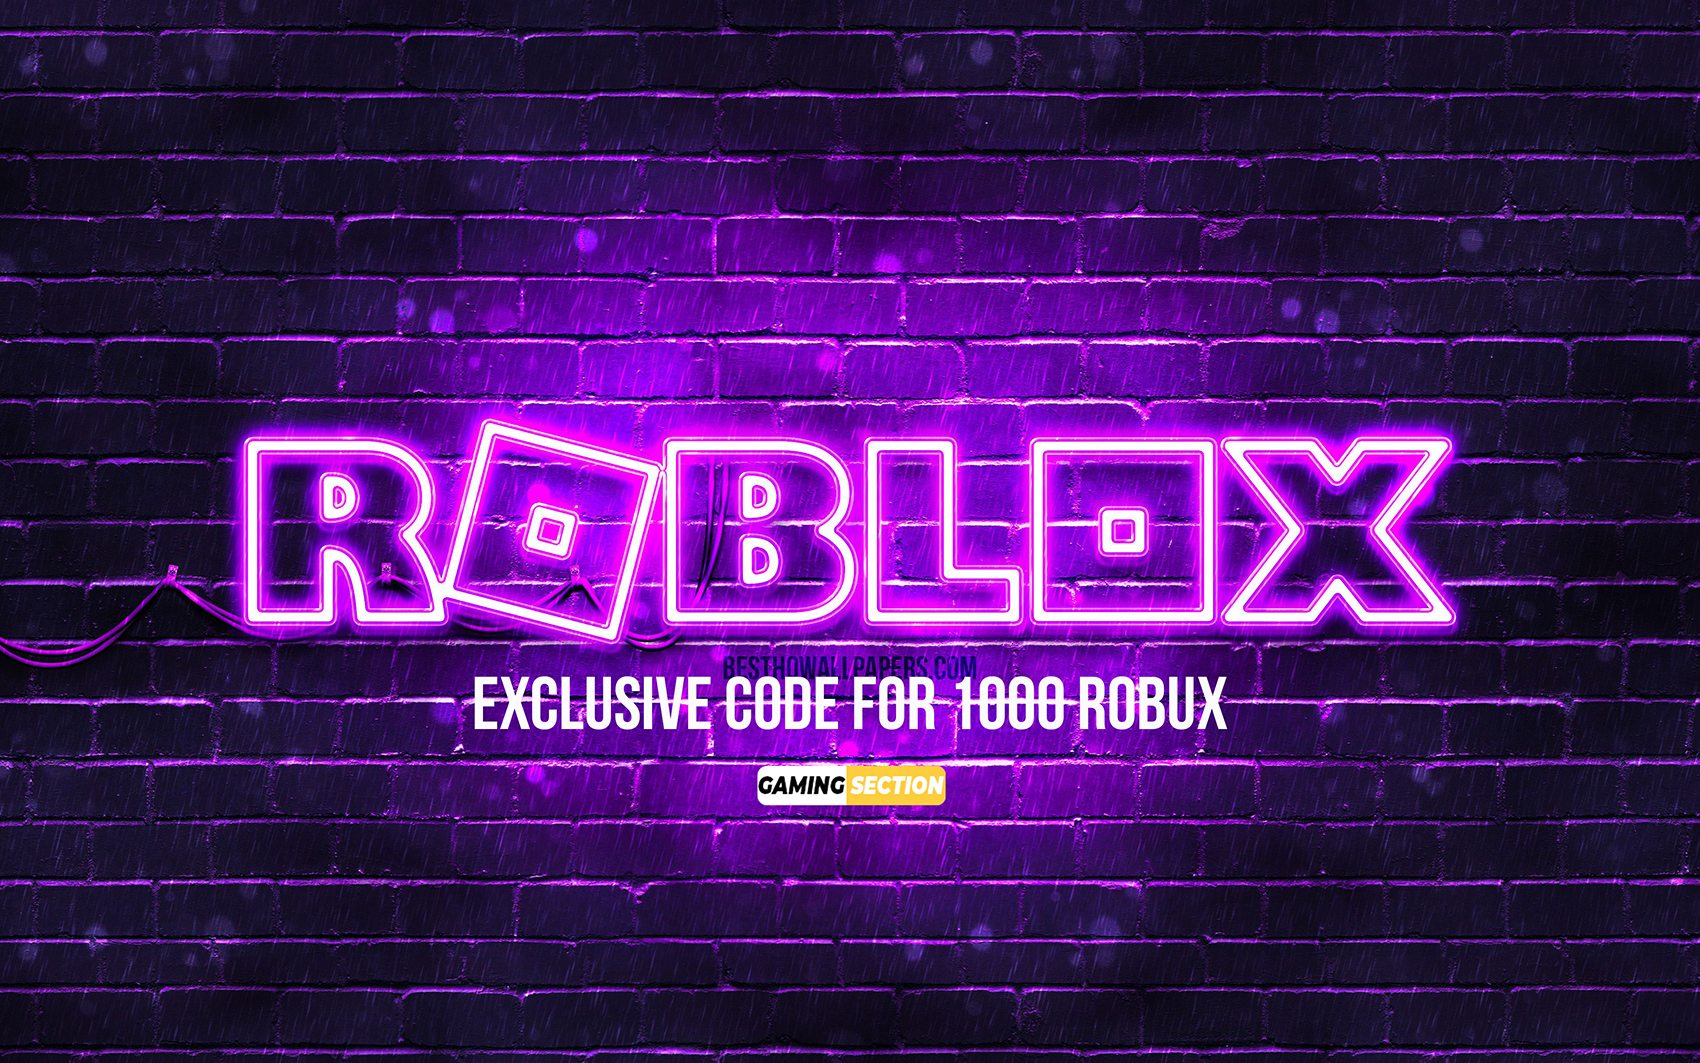 2. "Free 1000 Robux Code" - wide 5